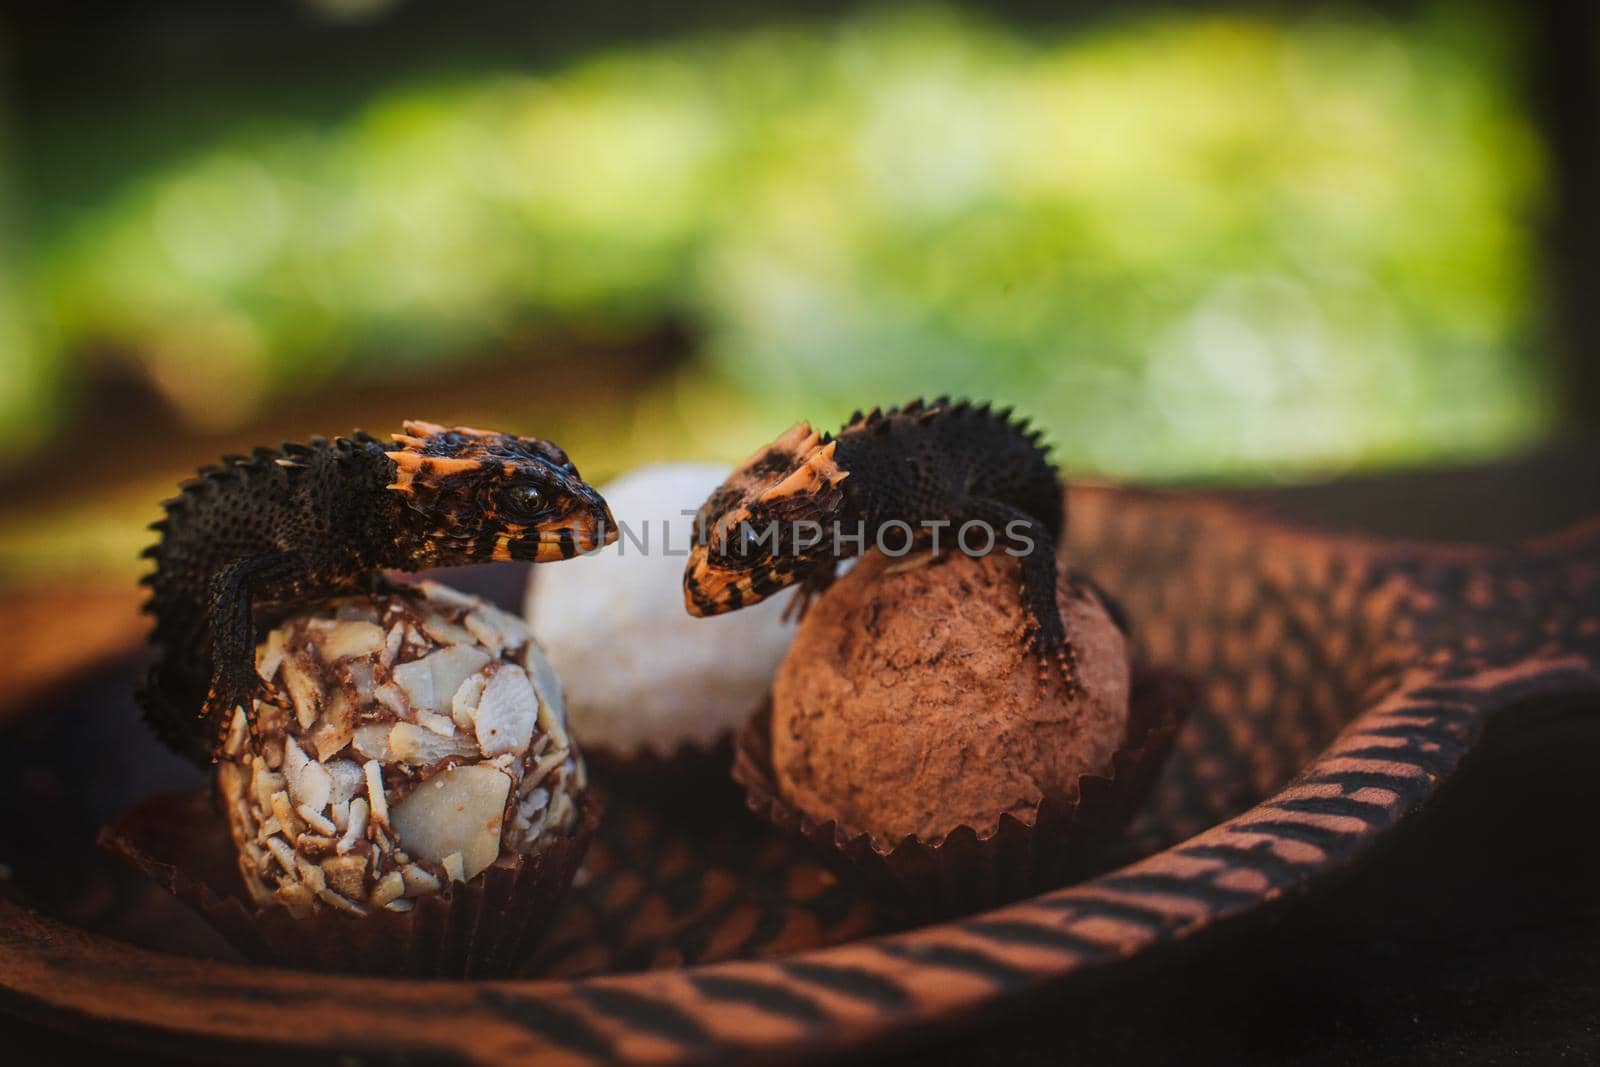 Red-eyed crocodile skinks, tribolonotus gracilis, in the garden on truffle candies